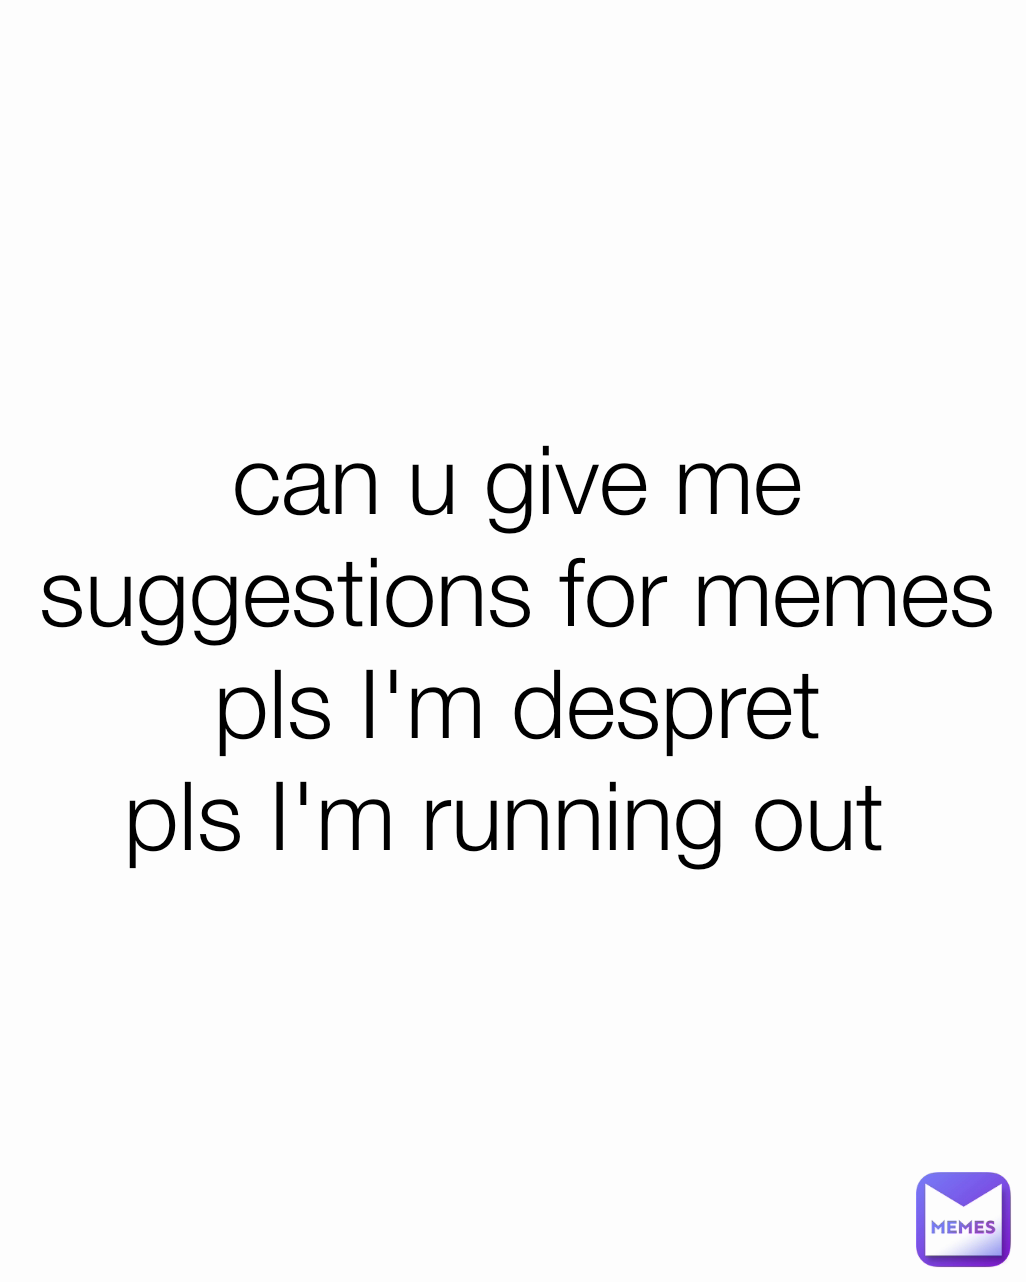 can u give me suggestions for memes pls I'm despret pls I'm running out